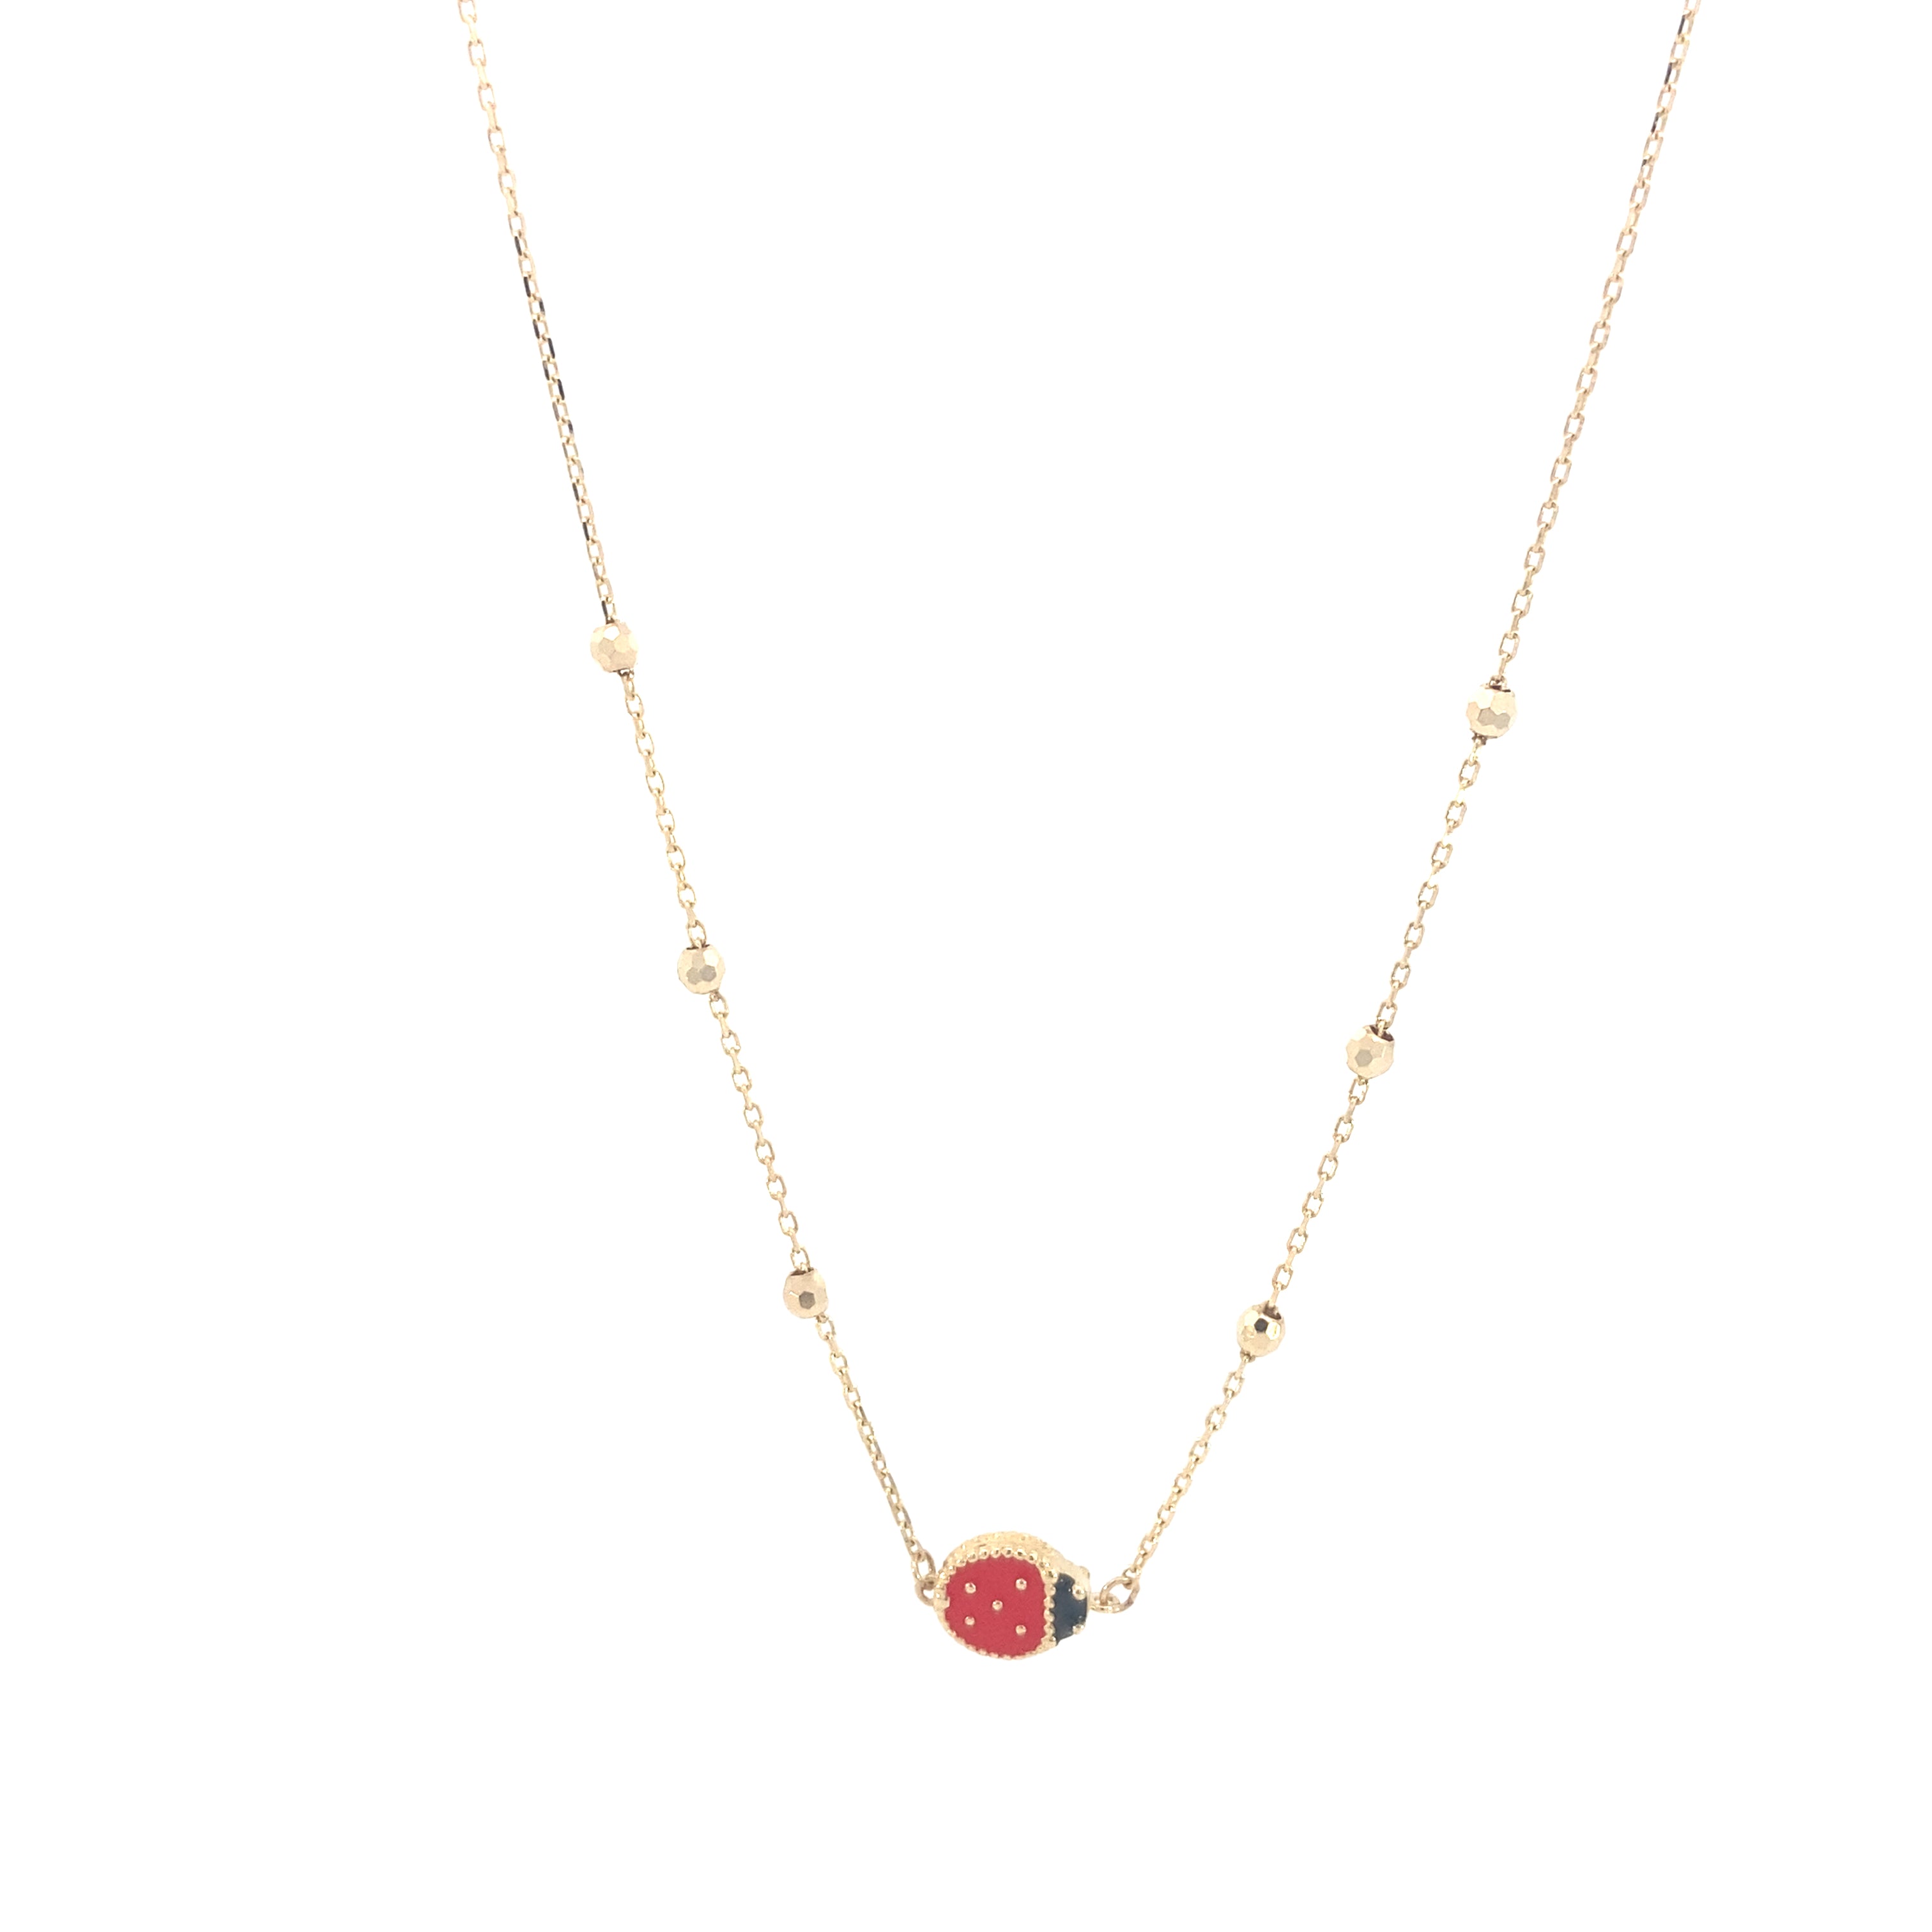 14K Gold Lady Bug Necklace with Red Enamel